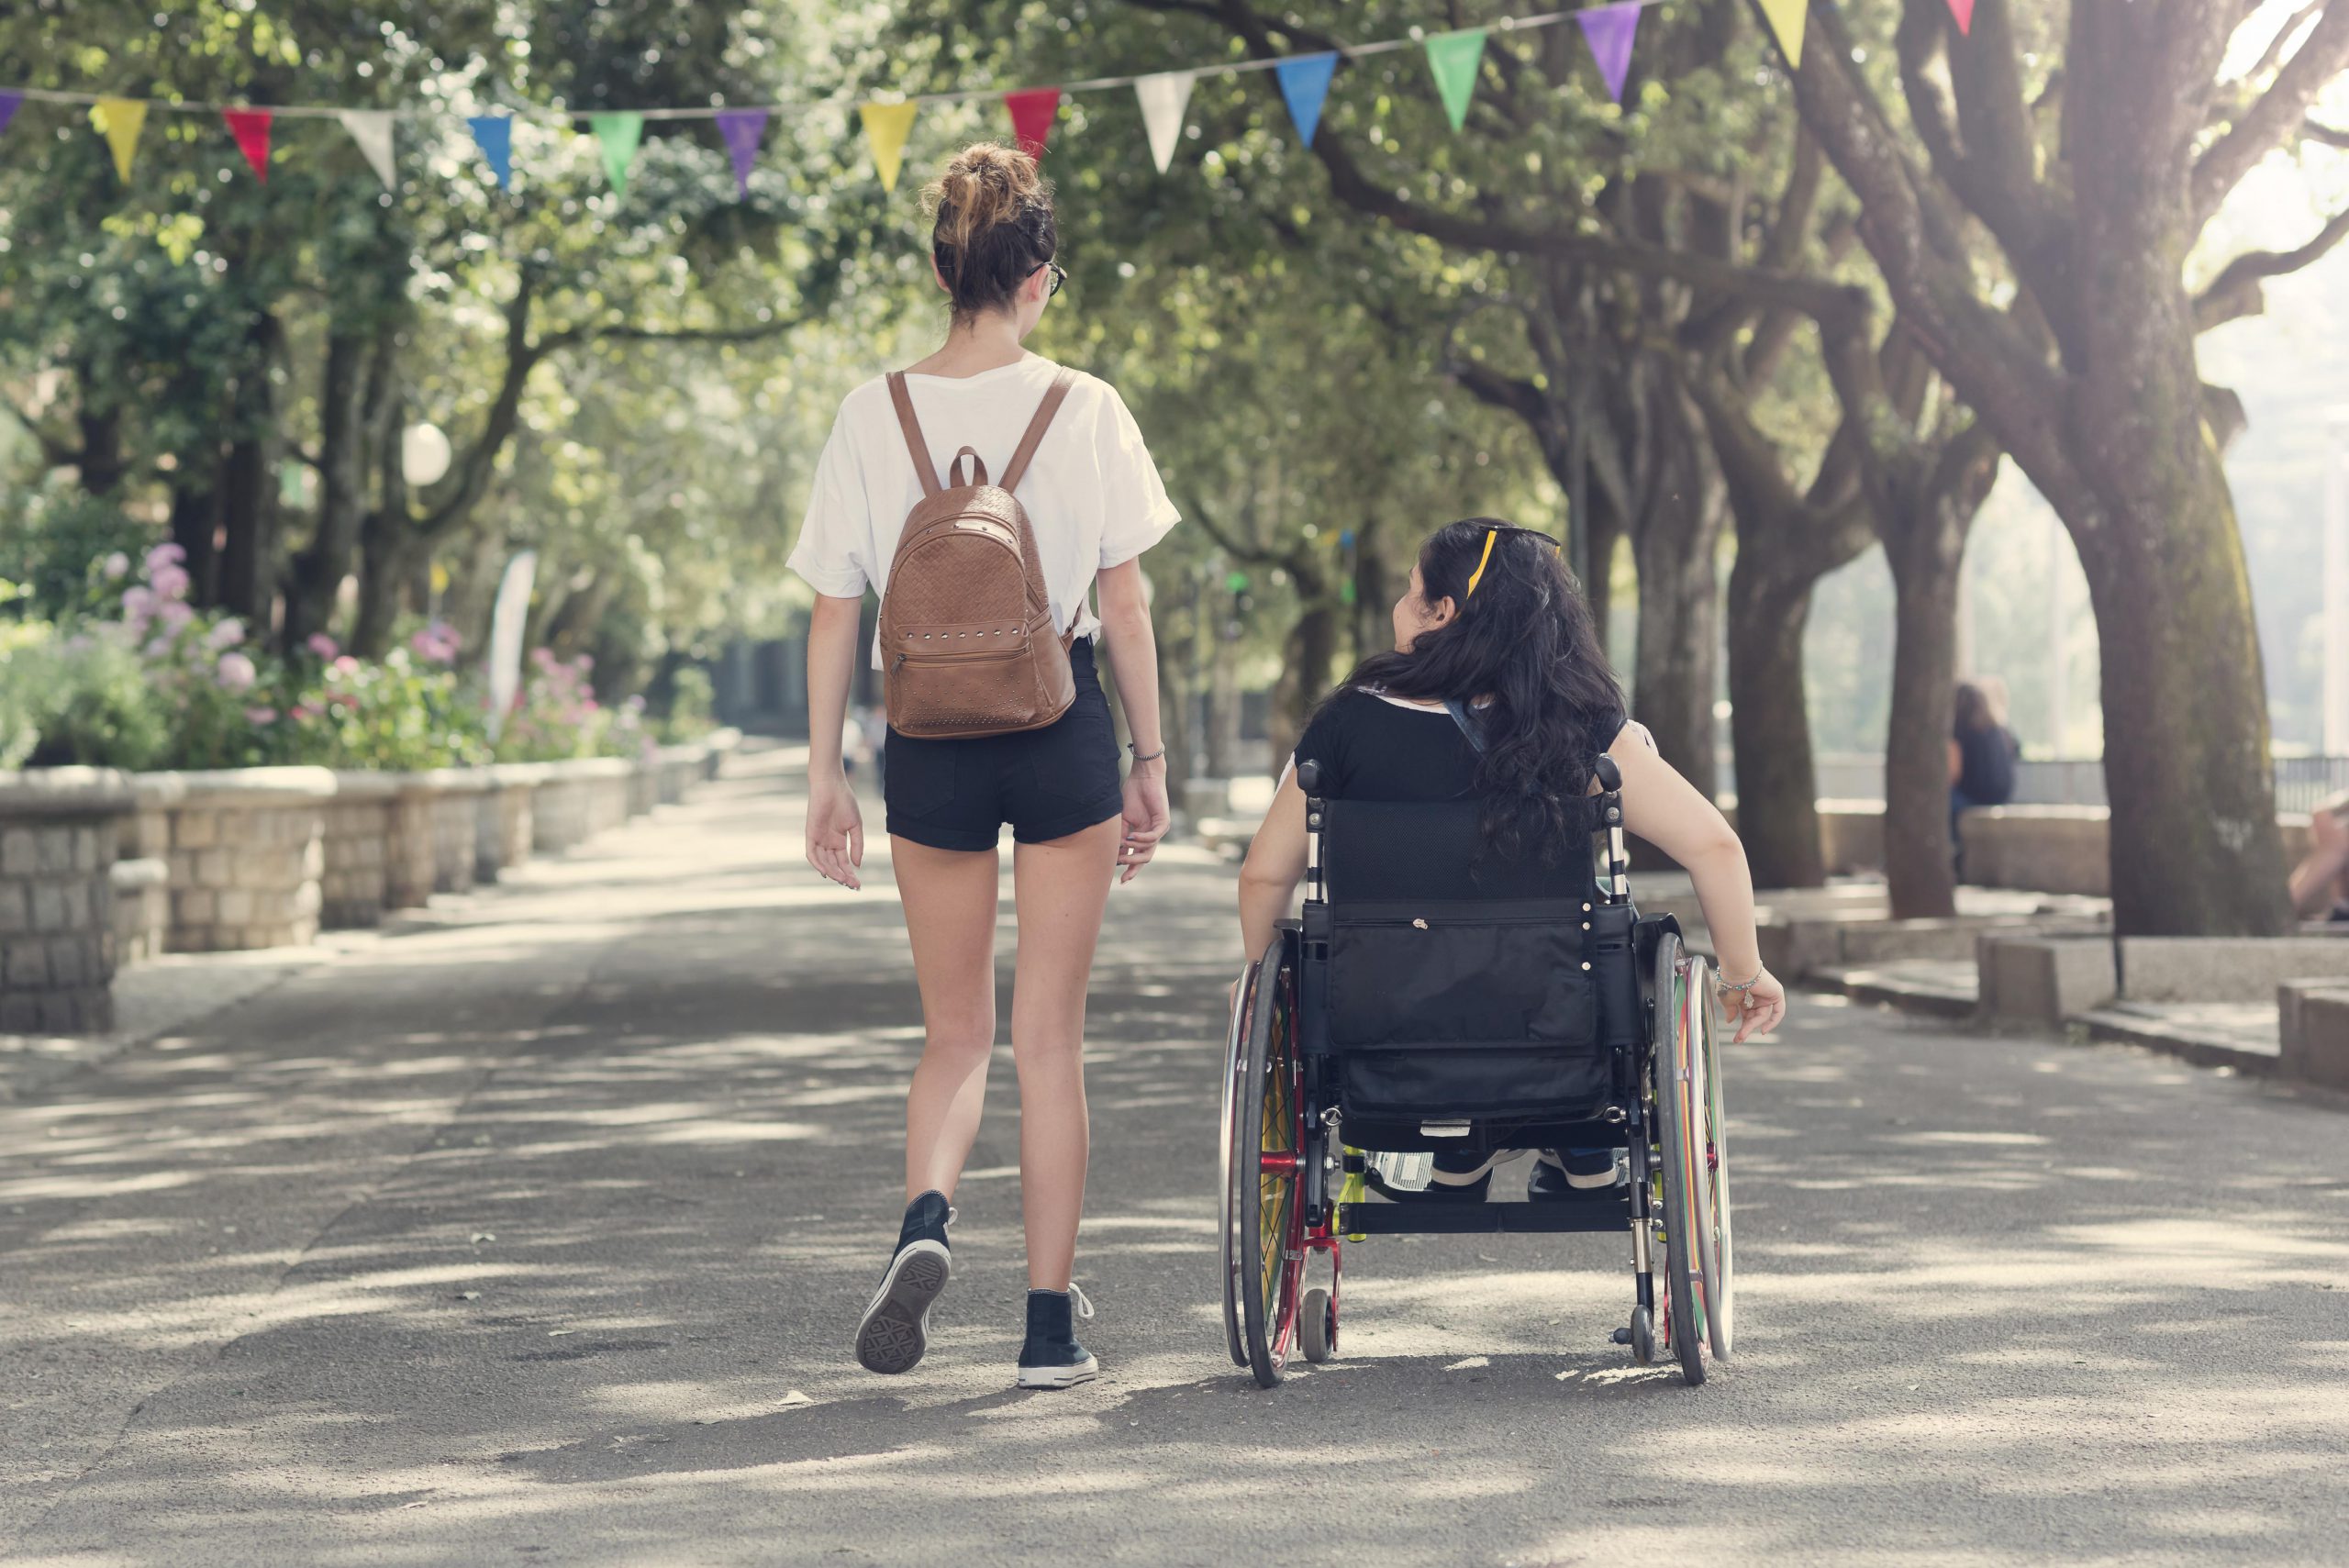 One woman who is walking and another who is steering her wheelchair travel down a tree-lined path side by side